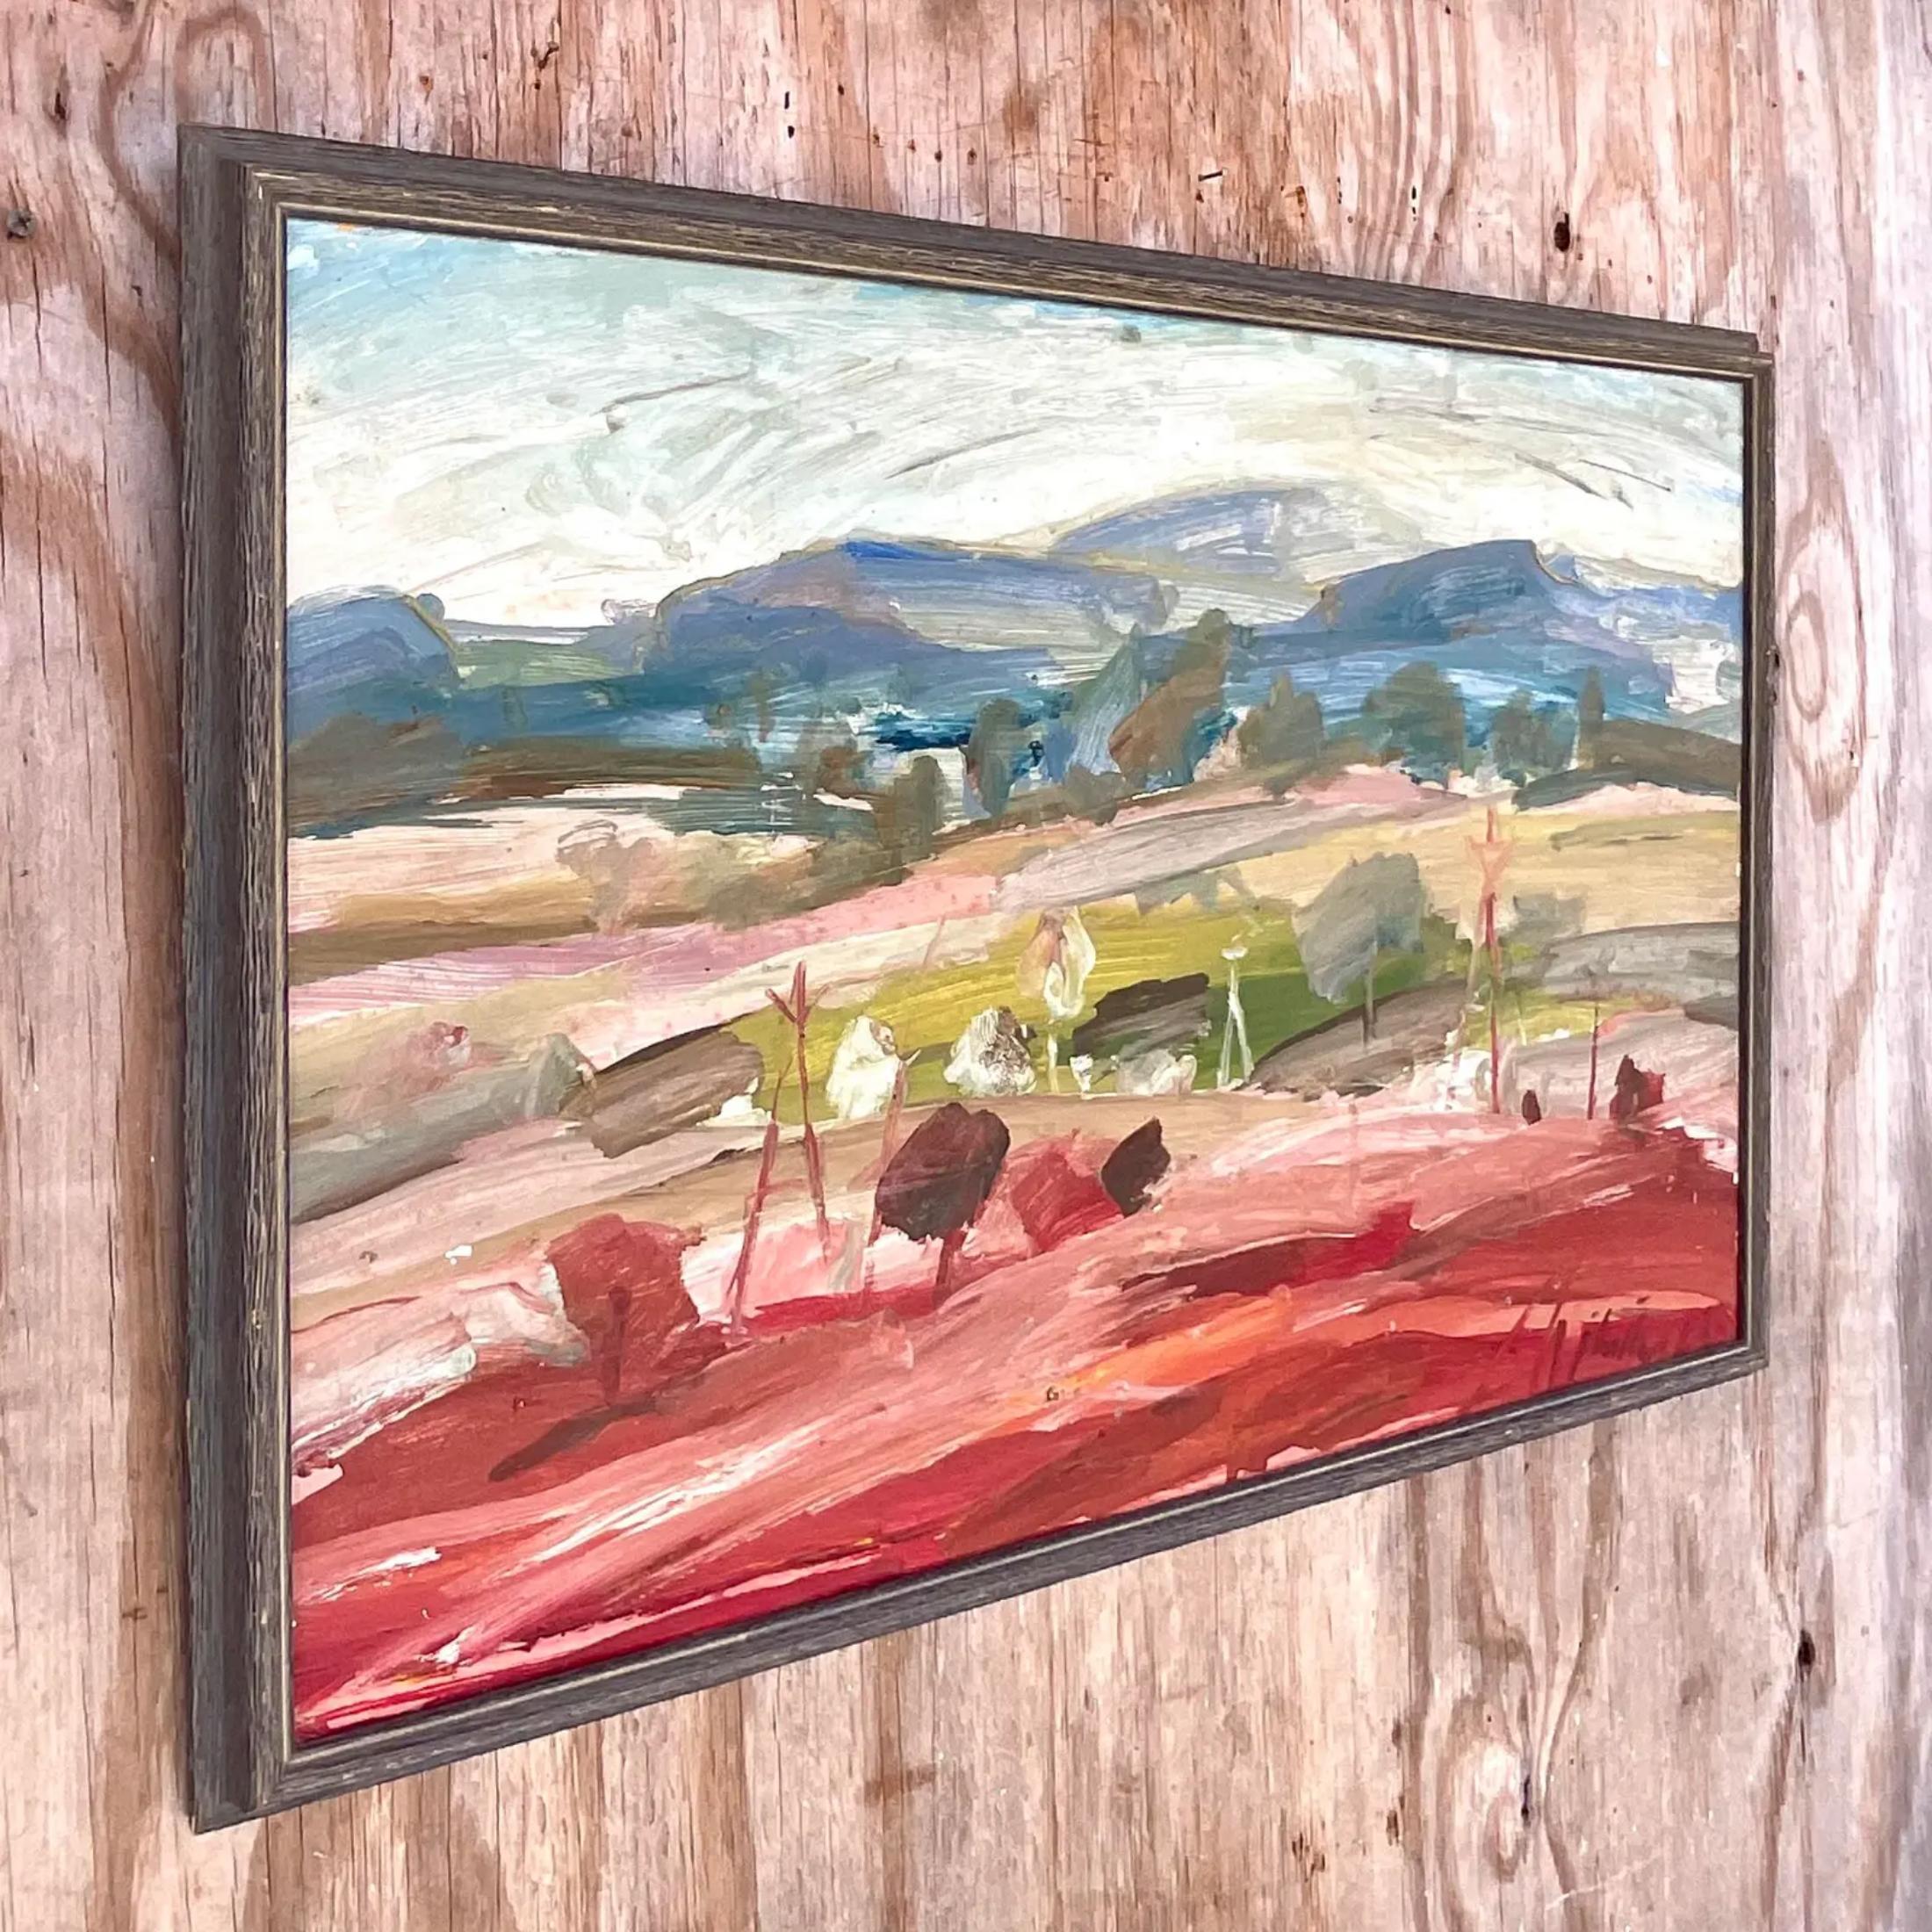 A fabulous vintage Boho original oil painting on canvas. A chic Abstract Expressionist Landscape in pale clear colors. Signed by the artist. Acquired from a Palm Beach estate